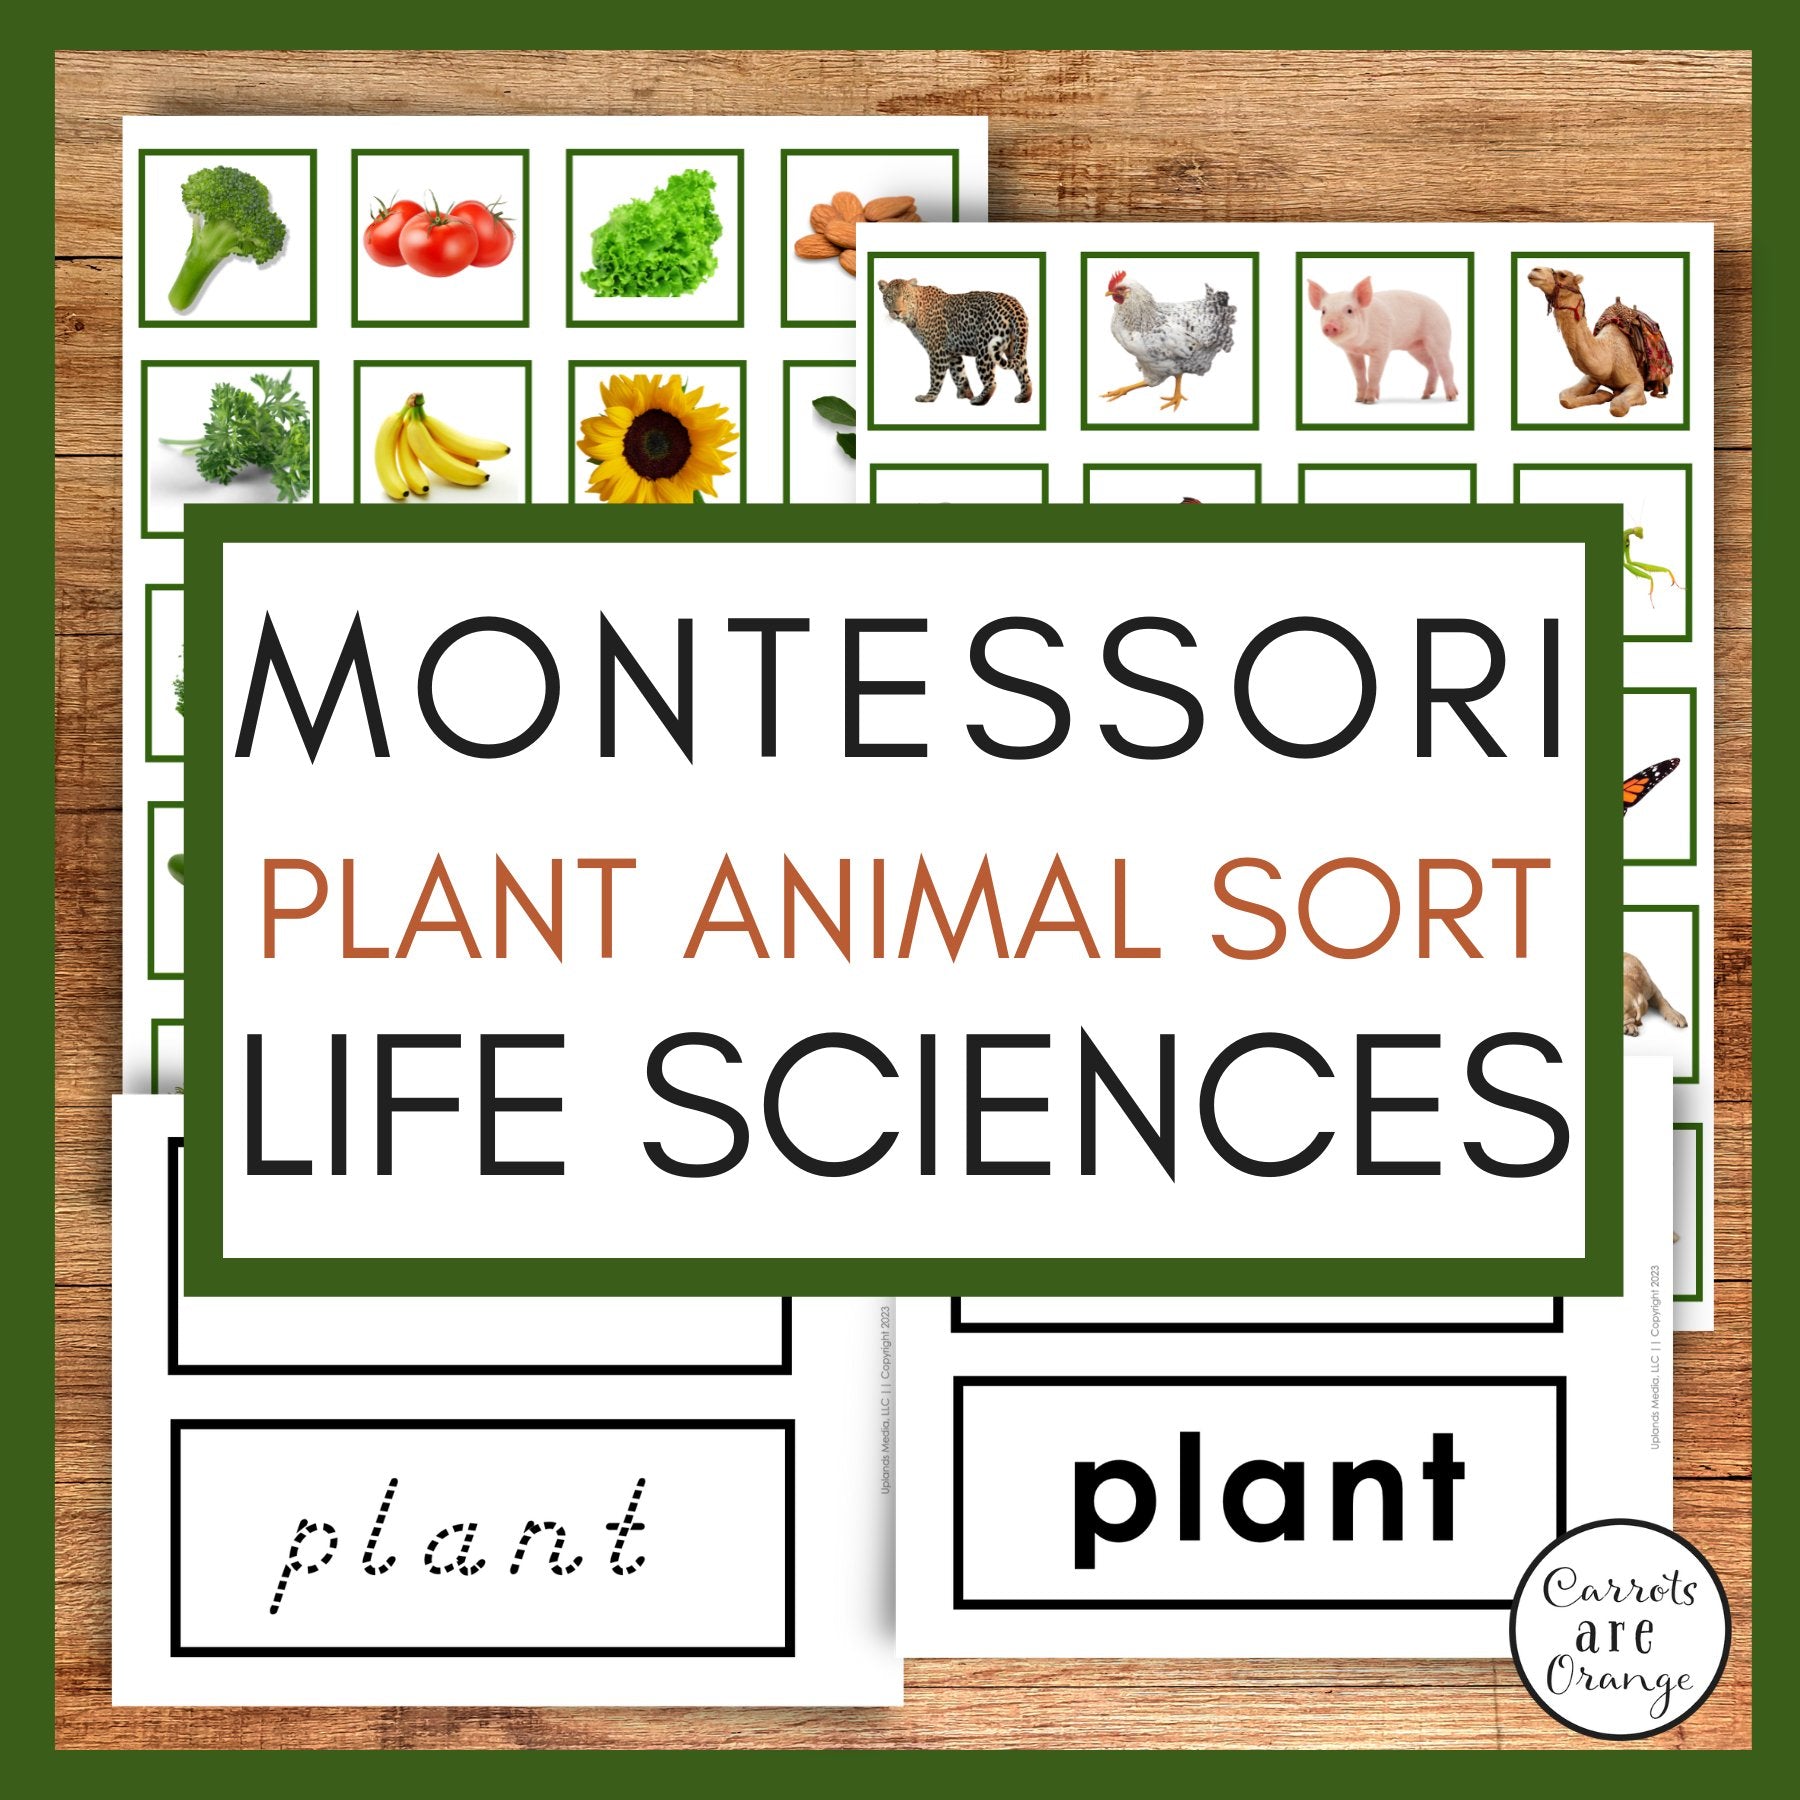 [Science] Plant & Animal Sort Activity - Printables by Carrots Are Orange